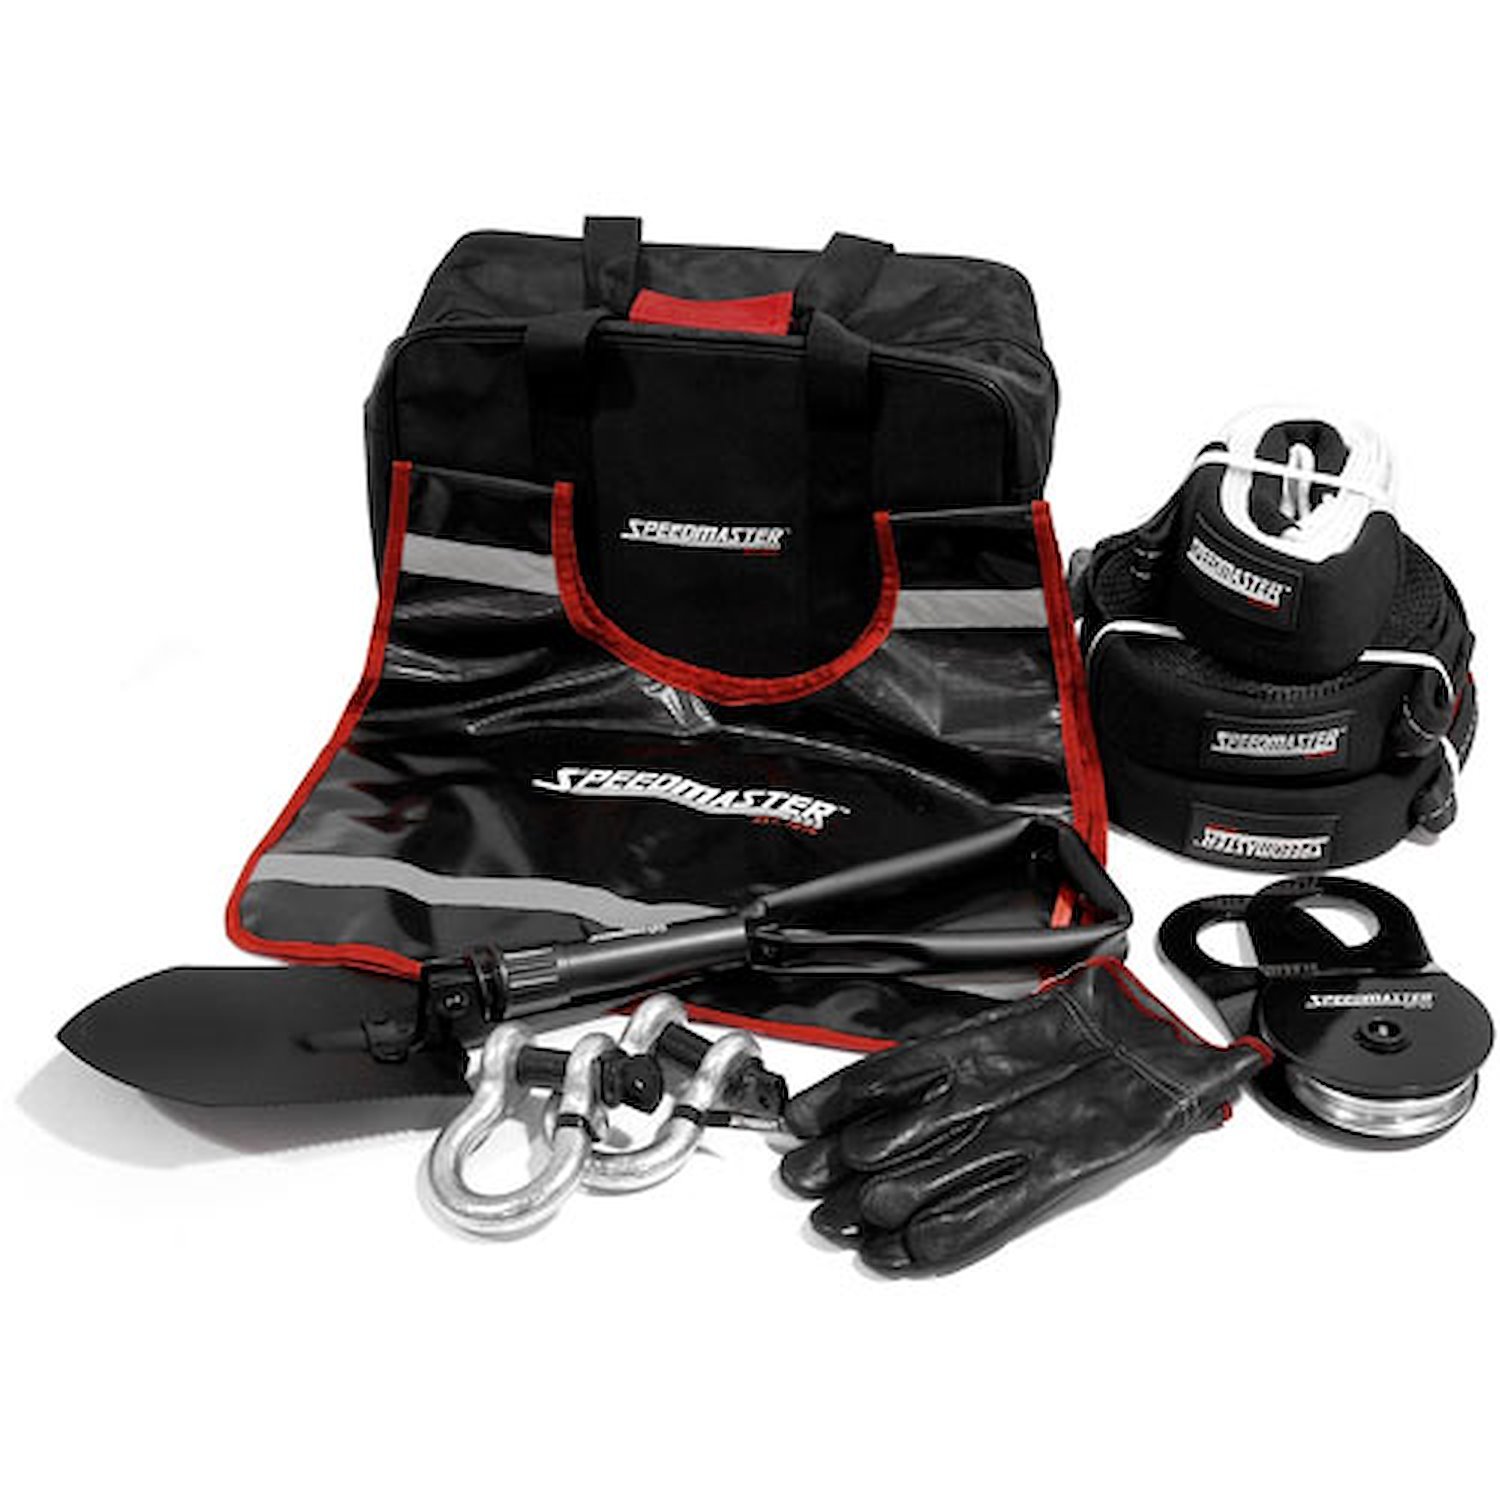 Deluxe 4WD Winch Recovery Kit Plus 10-Piece Kit Includes: Tow Strap